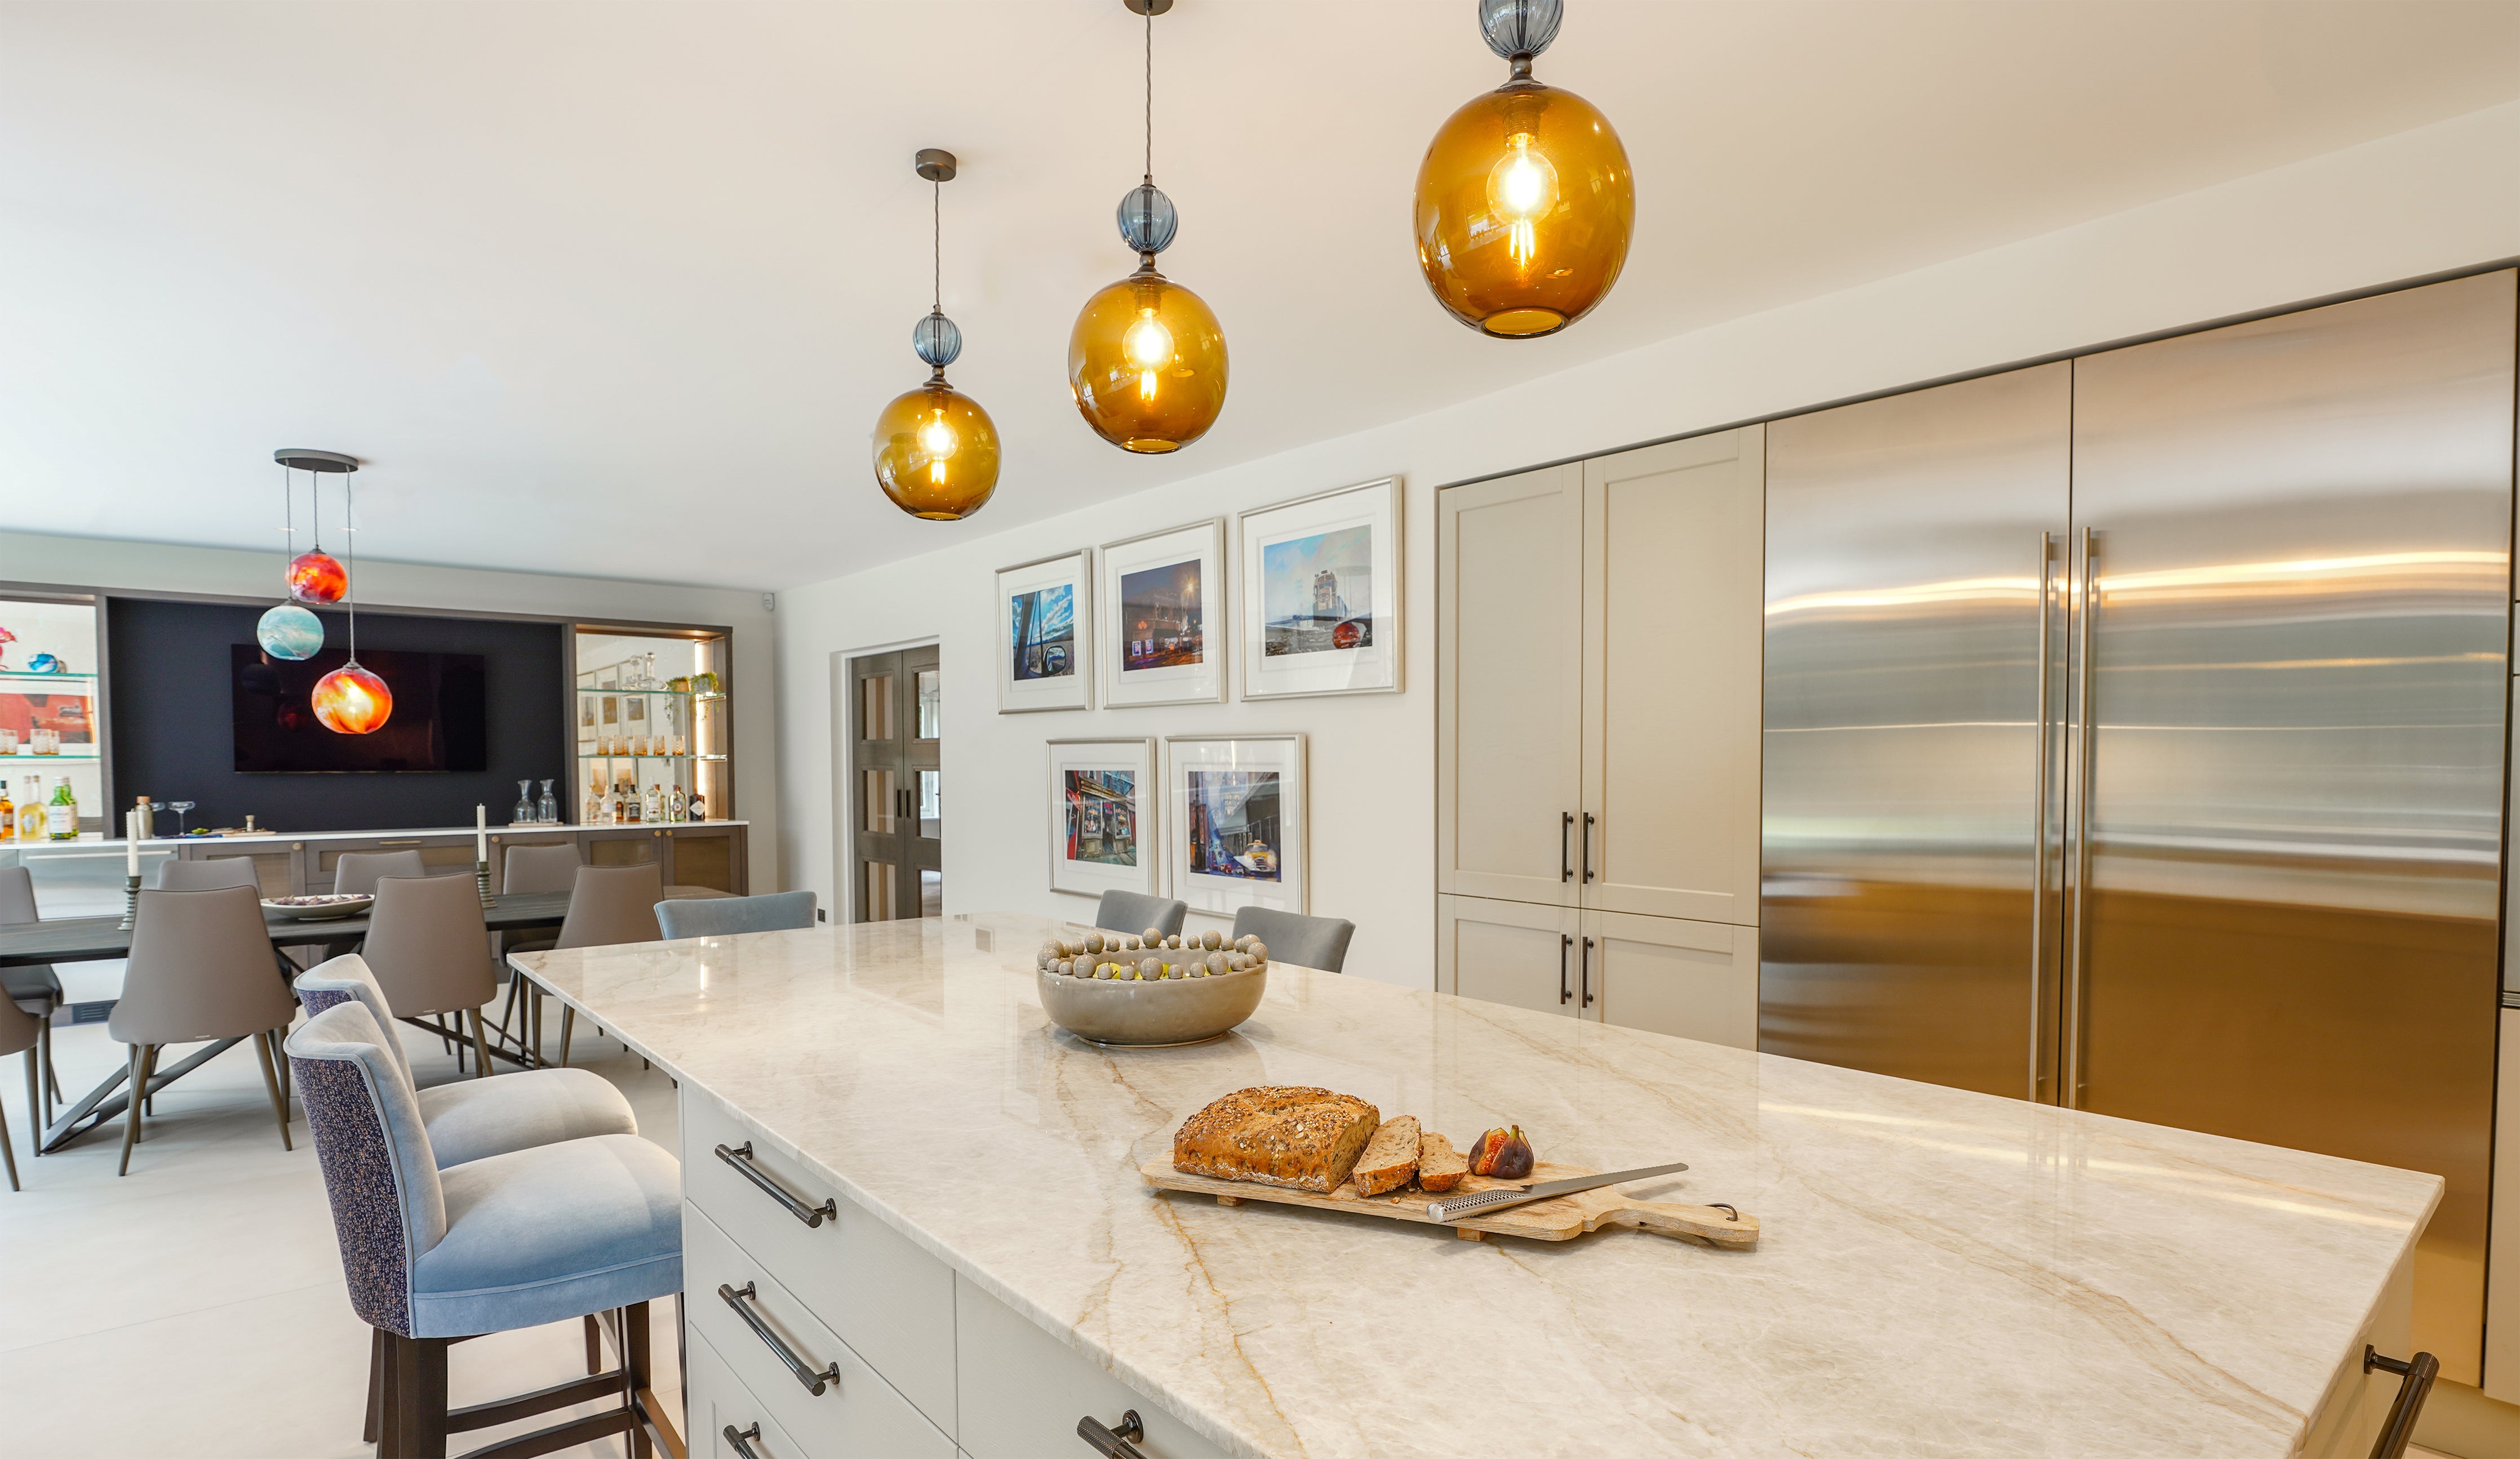 Pendant lighting by Rothschild &amp; Bickers hanging over kitchen island and dining table